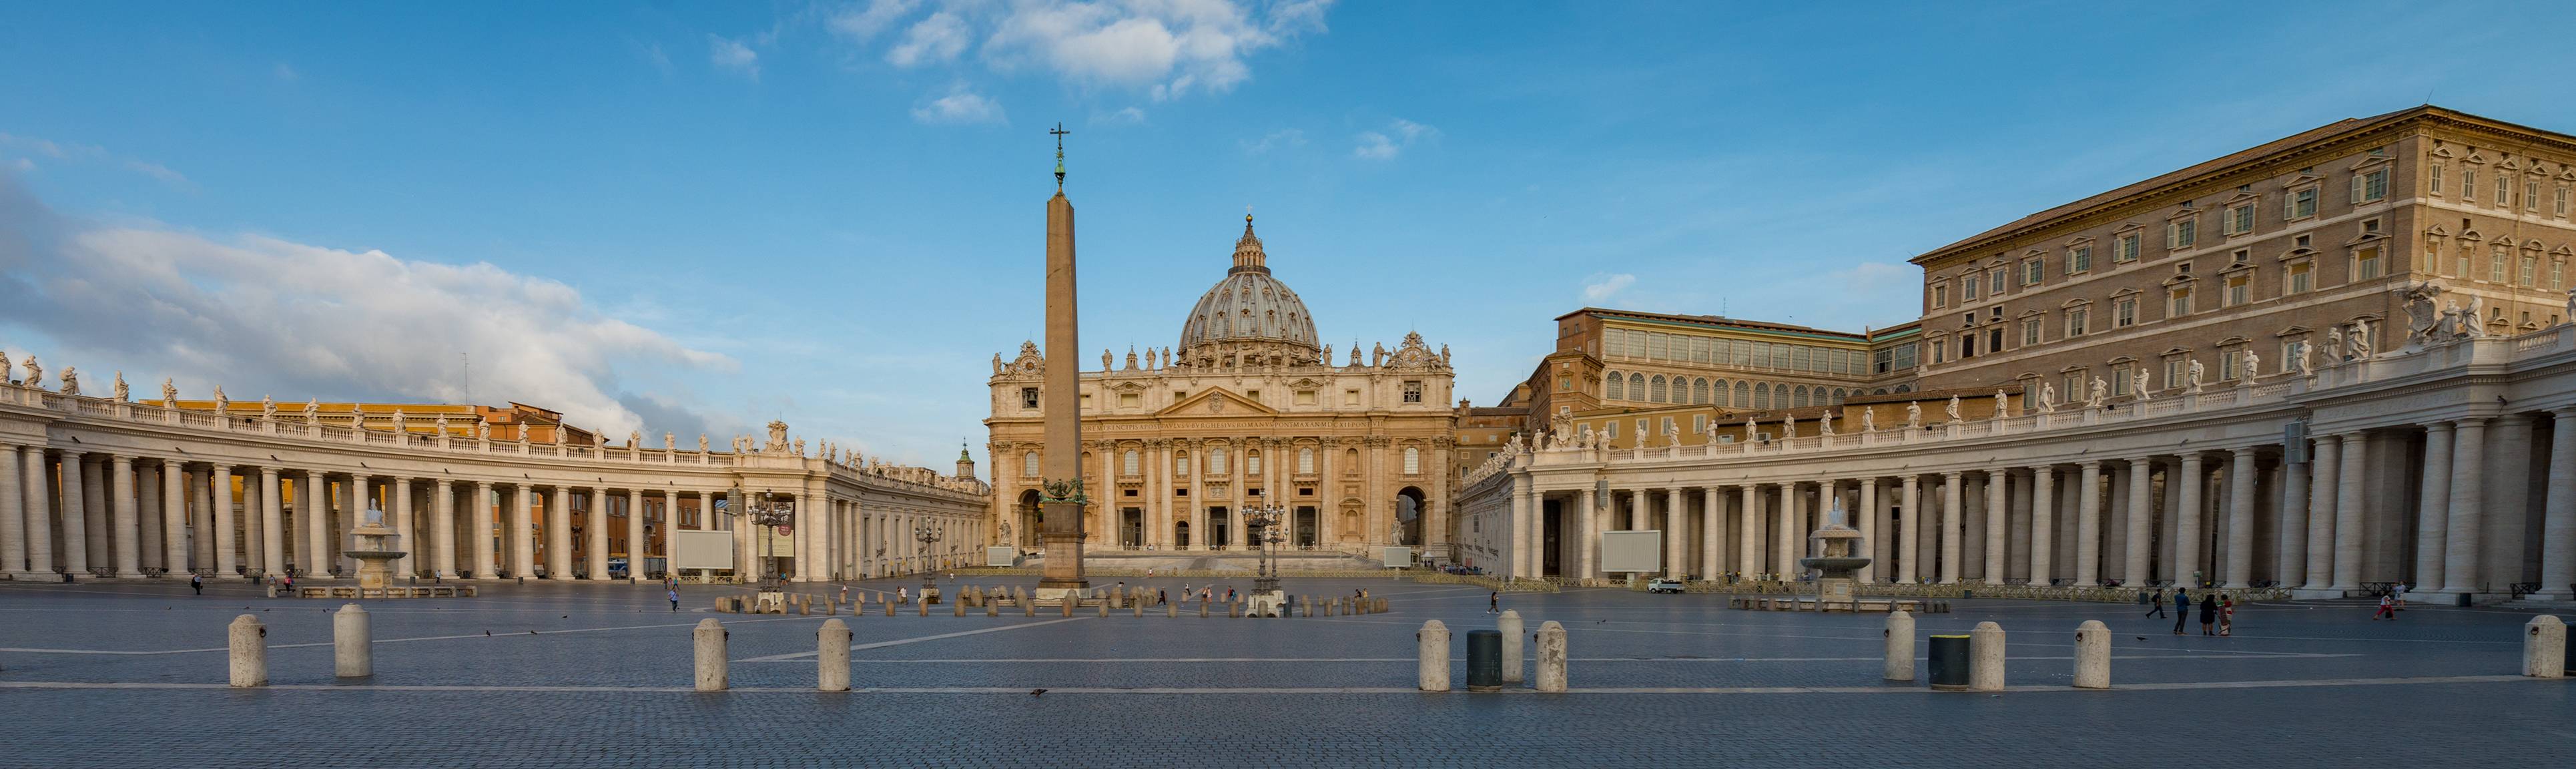 View of St. Peter's Square with St. Peter's Basilica in the background